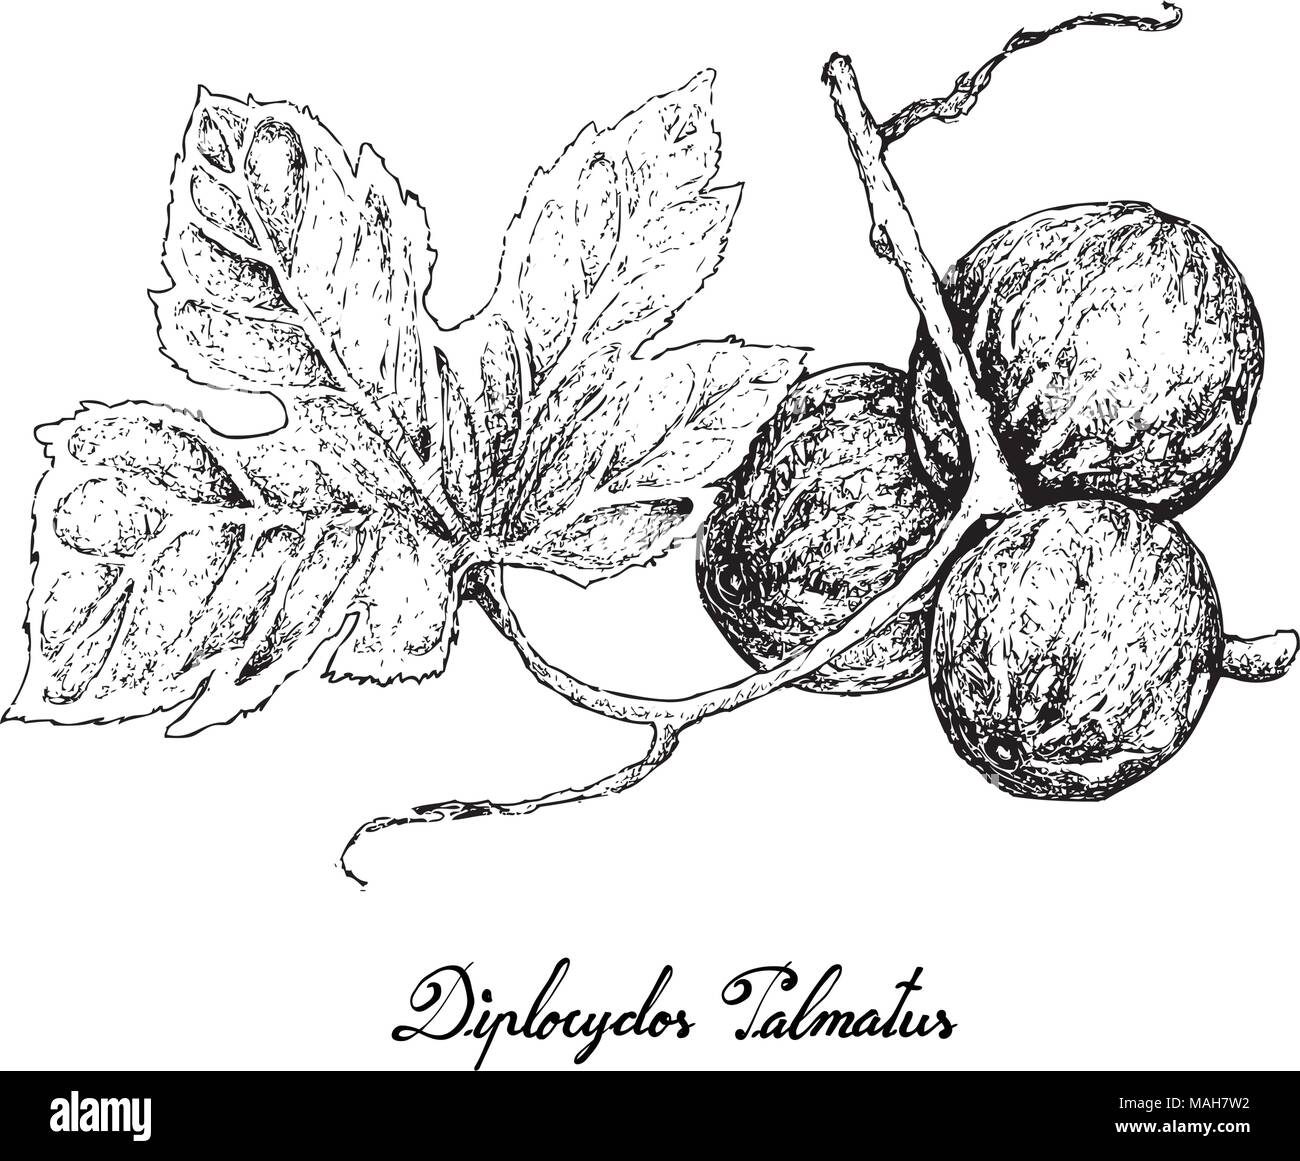 Vegetable and Fruit, Illustration Hand Drawn Sketch of Native Bryony, Striped Cucumber or Diplocyclos Palmatus Fruits Isolated on White Background. Stock Vector